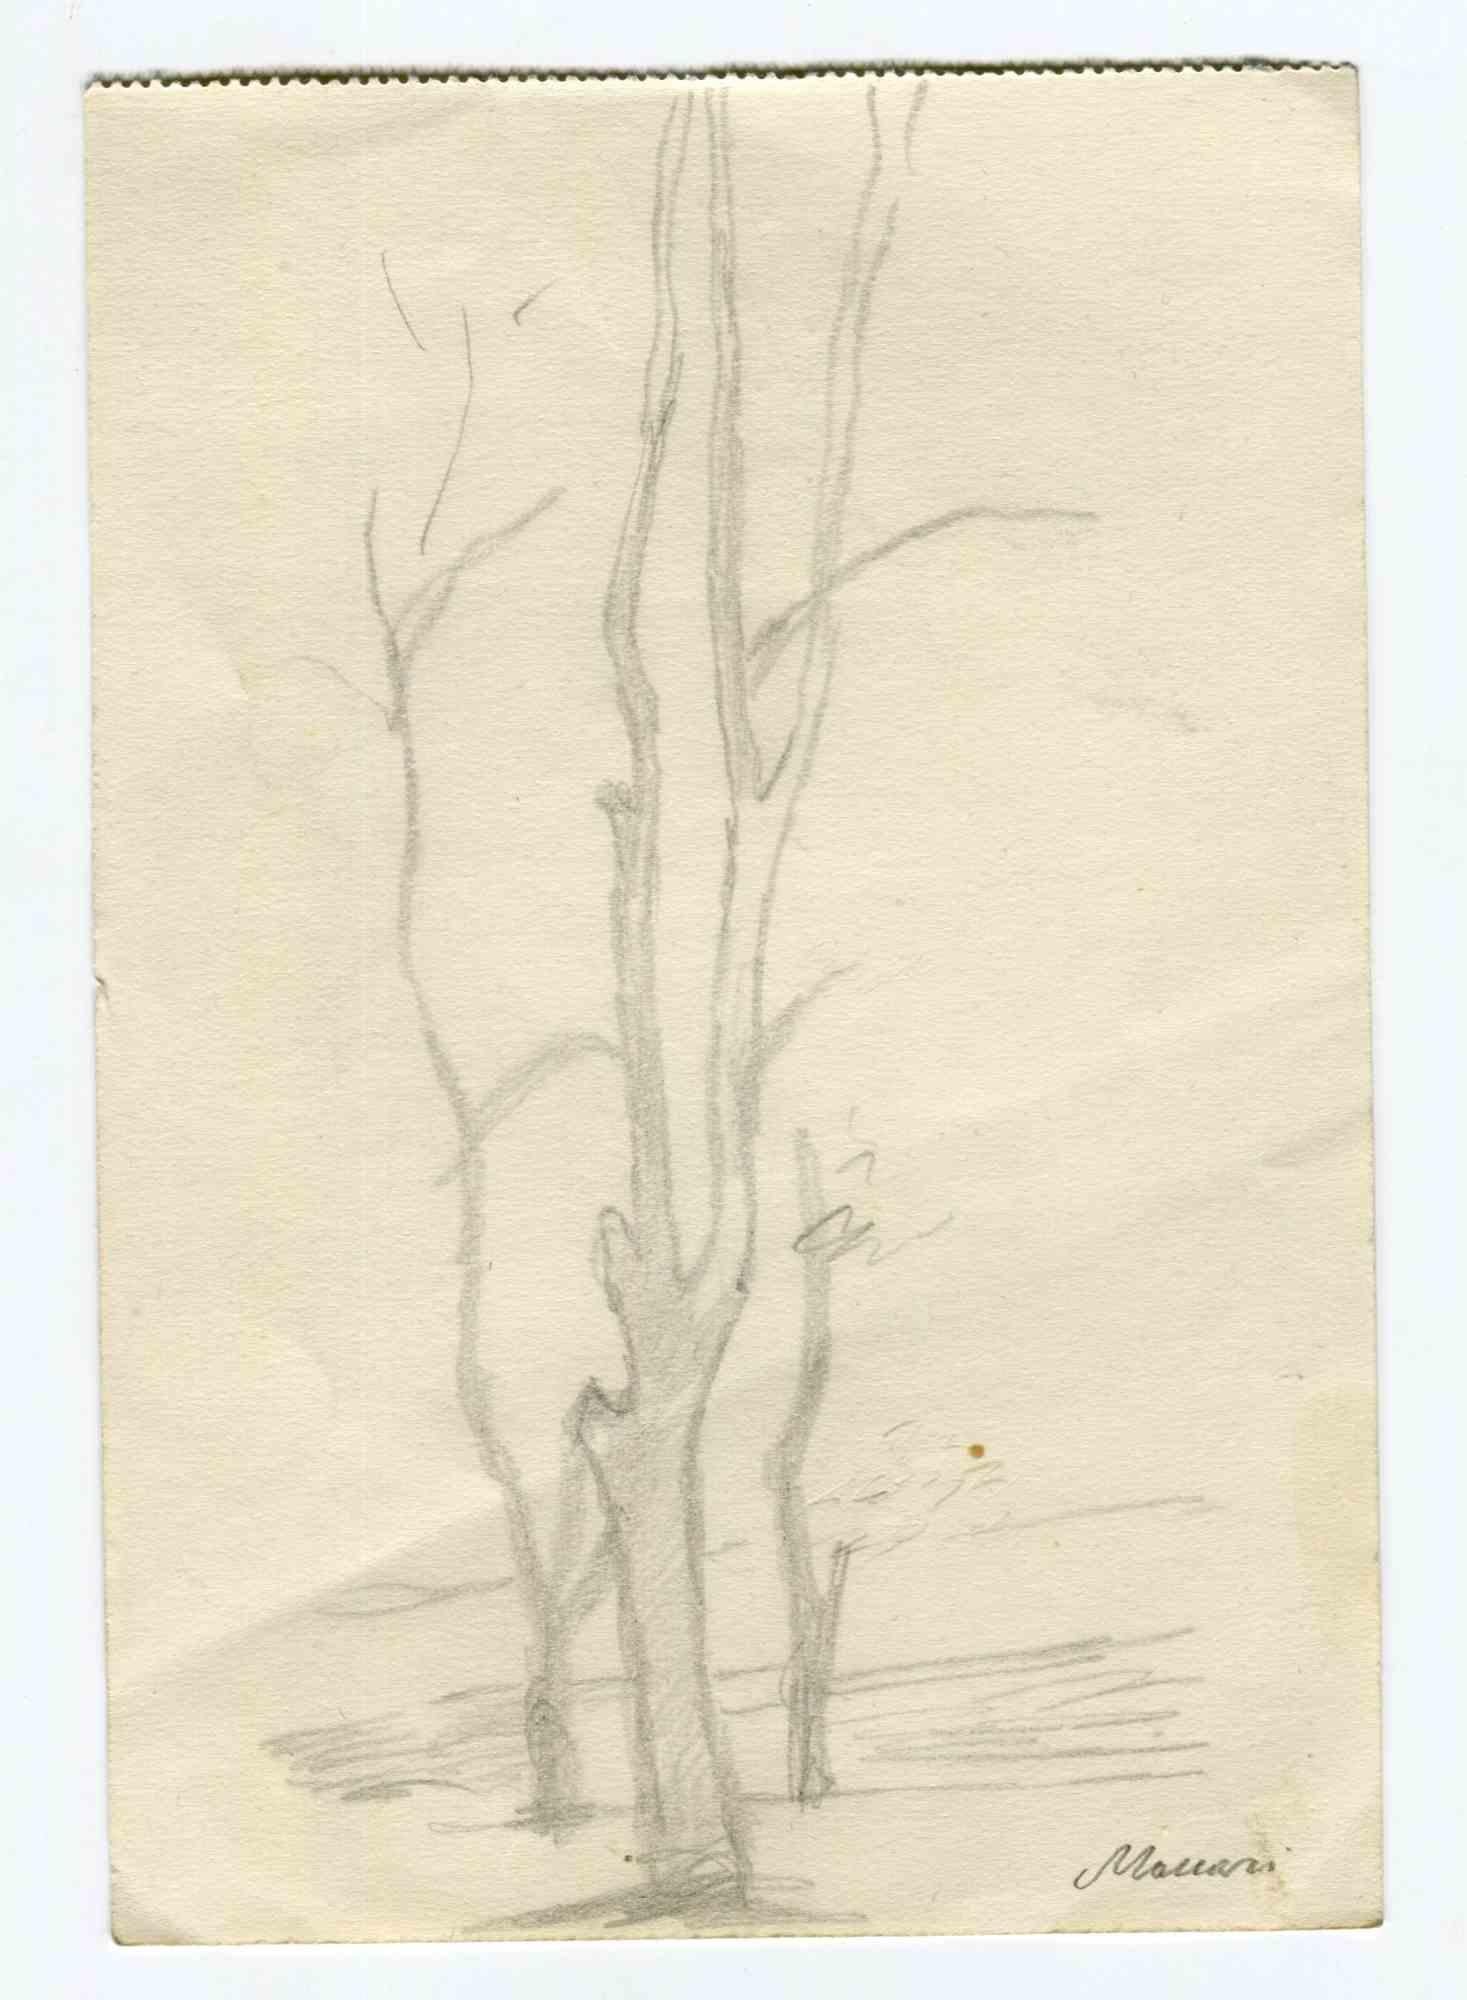 The Trees is an original drawing in Pencil realized by Mino Maccari in the mid-20th Century.

Good condition.

The artwork is depicted through strong strokes in a well-balanced composition.